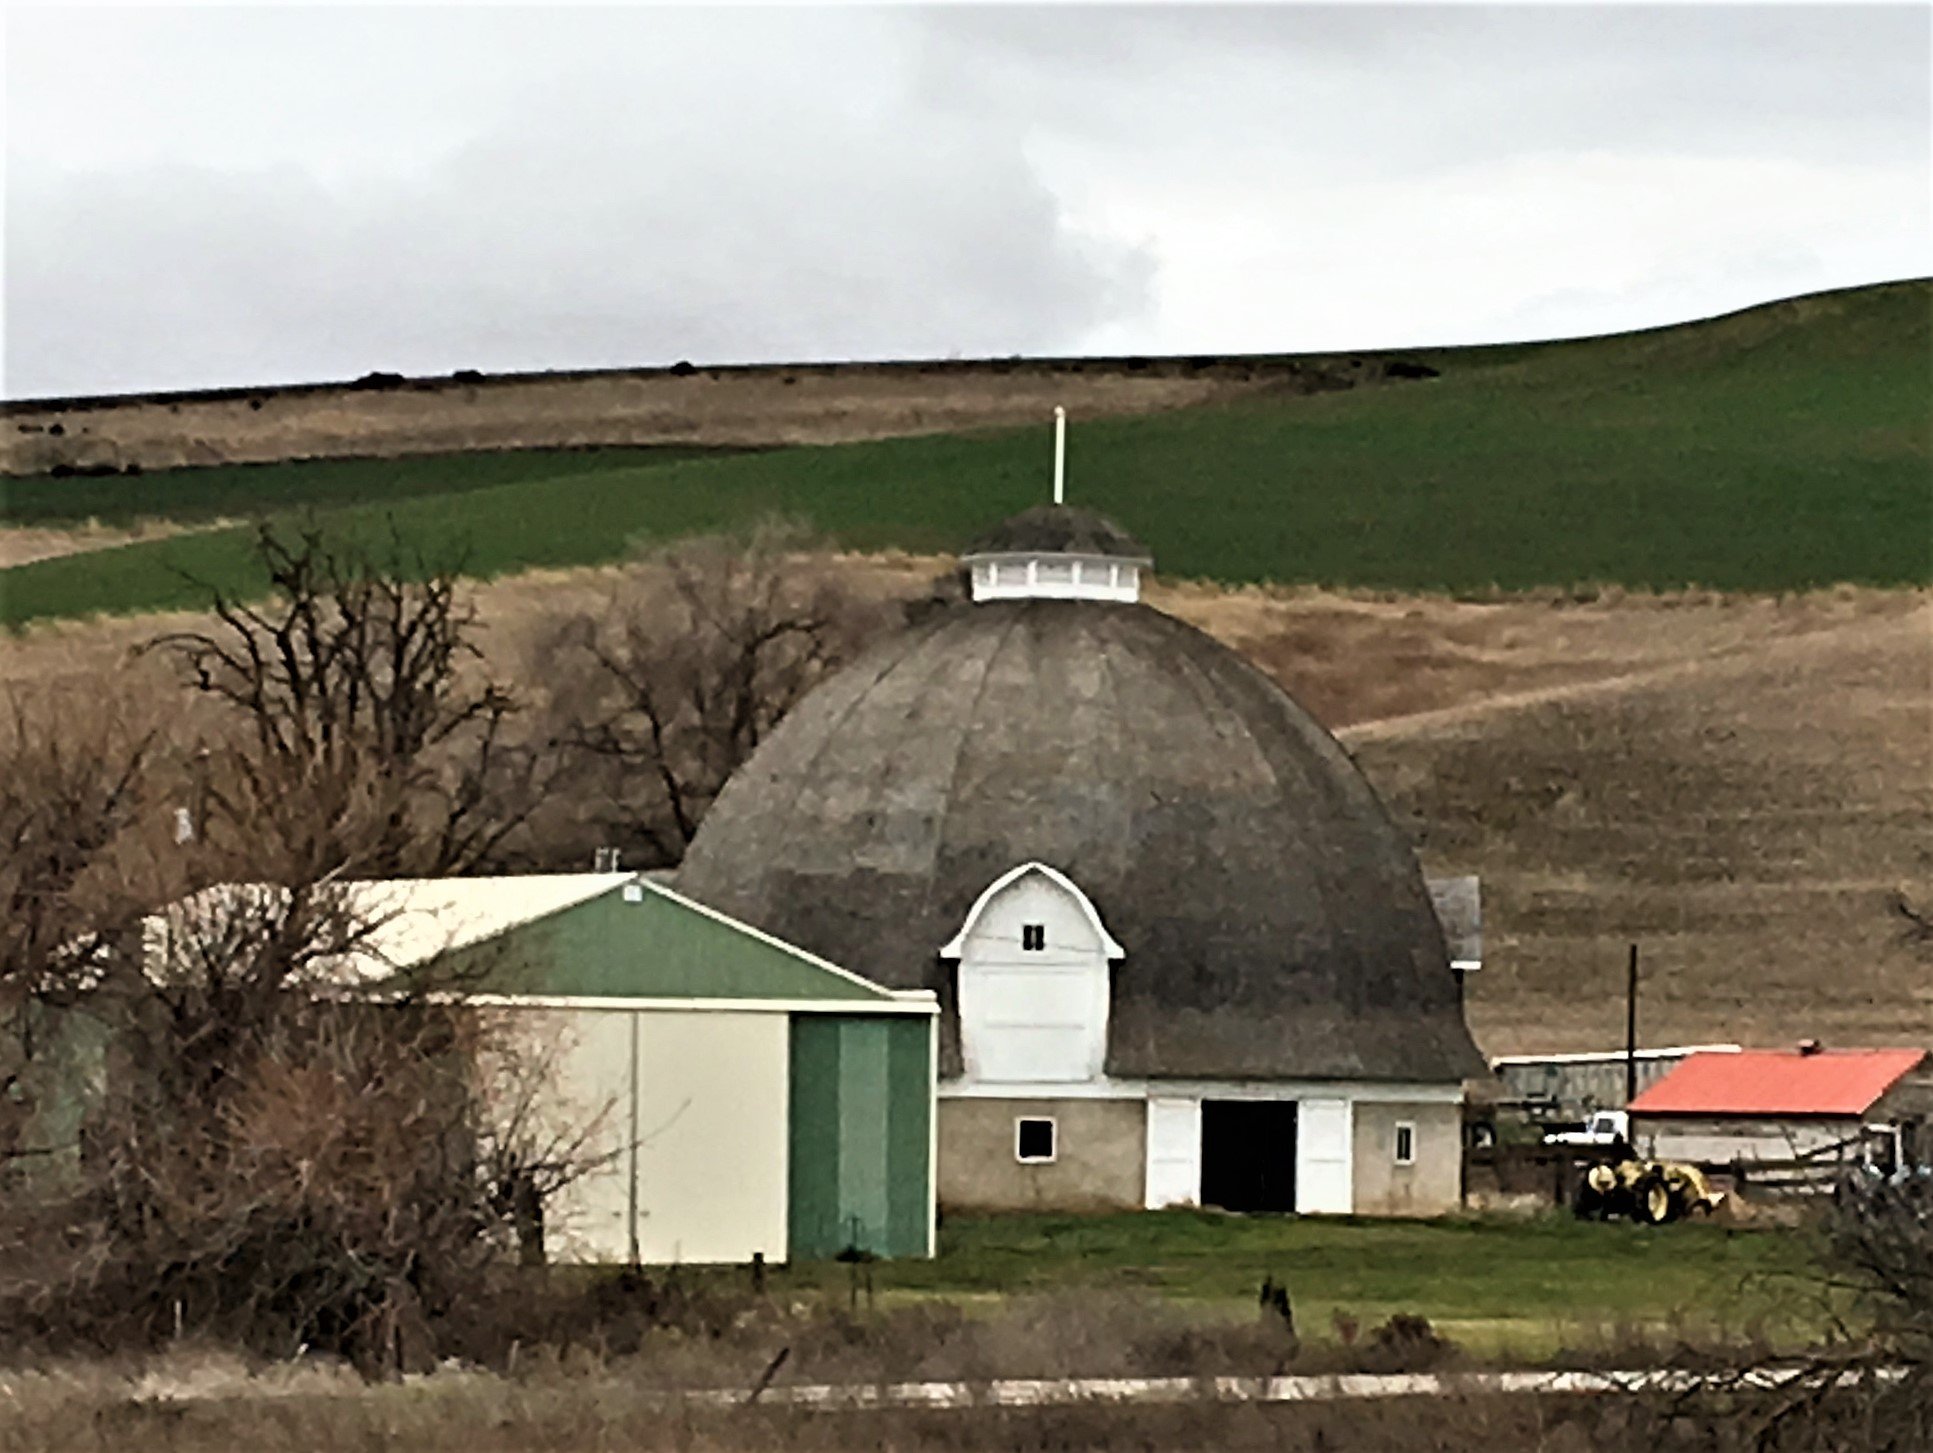 The Max Steinke Barn is one of the best-preserved round barns in Washington.